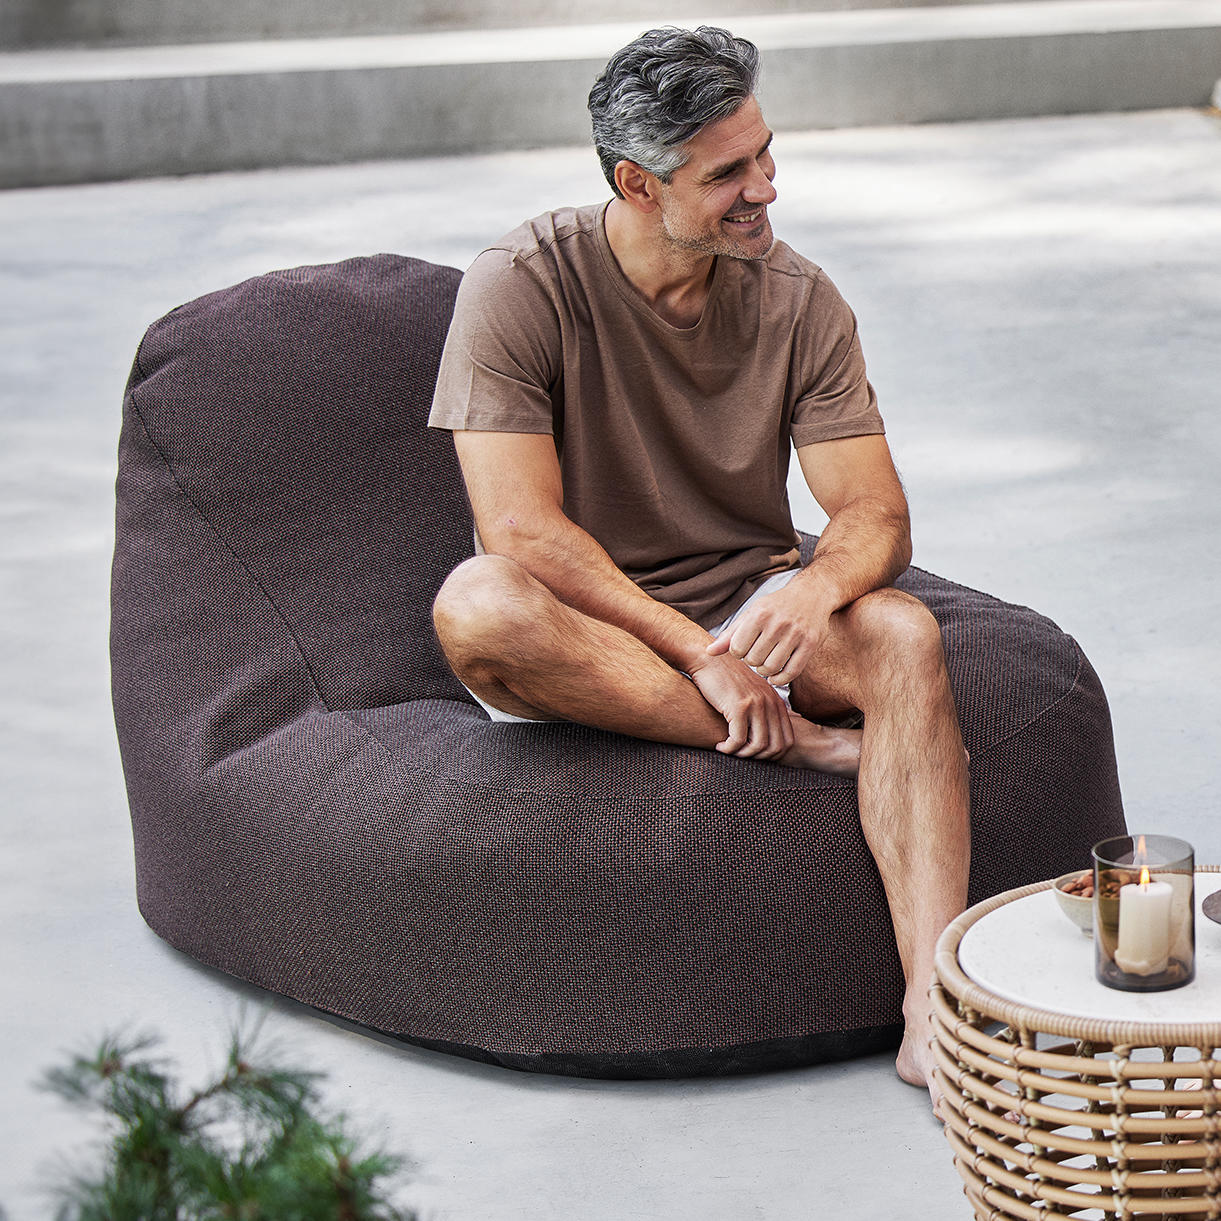 Buy Cozy Outdoor Bean Bag Chairs — The Worm that Turned